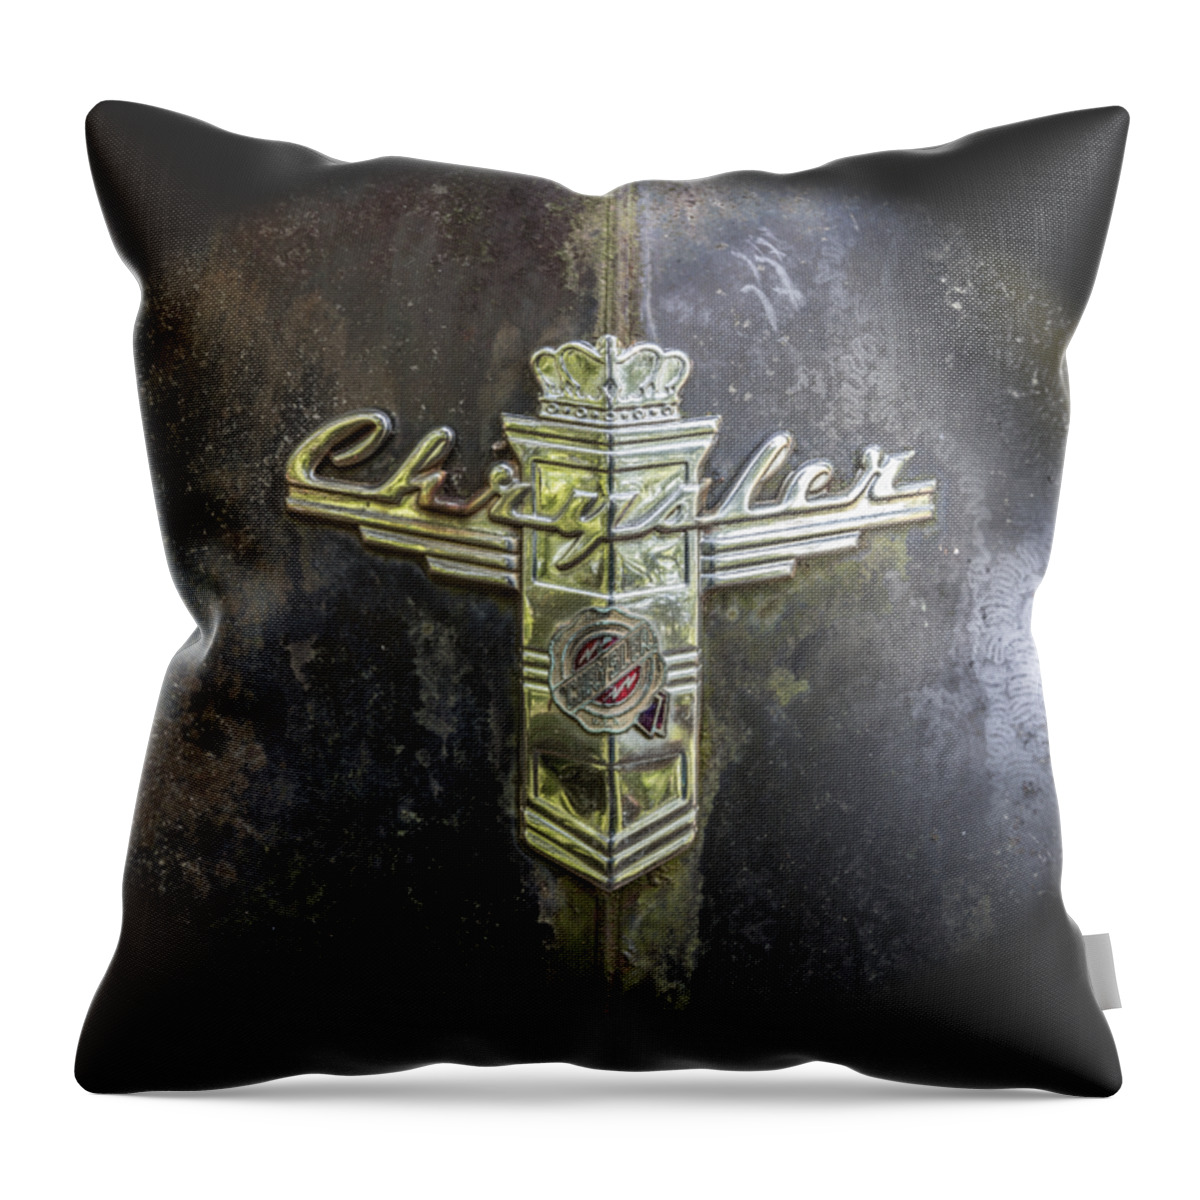 1930s Throw Pillow featuring the photograph Chrysler Hood Ornament by Debra and Dave Vanderlaan